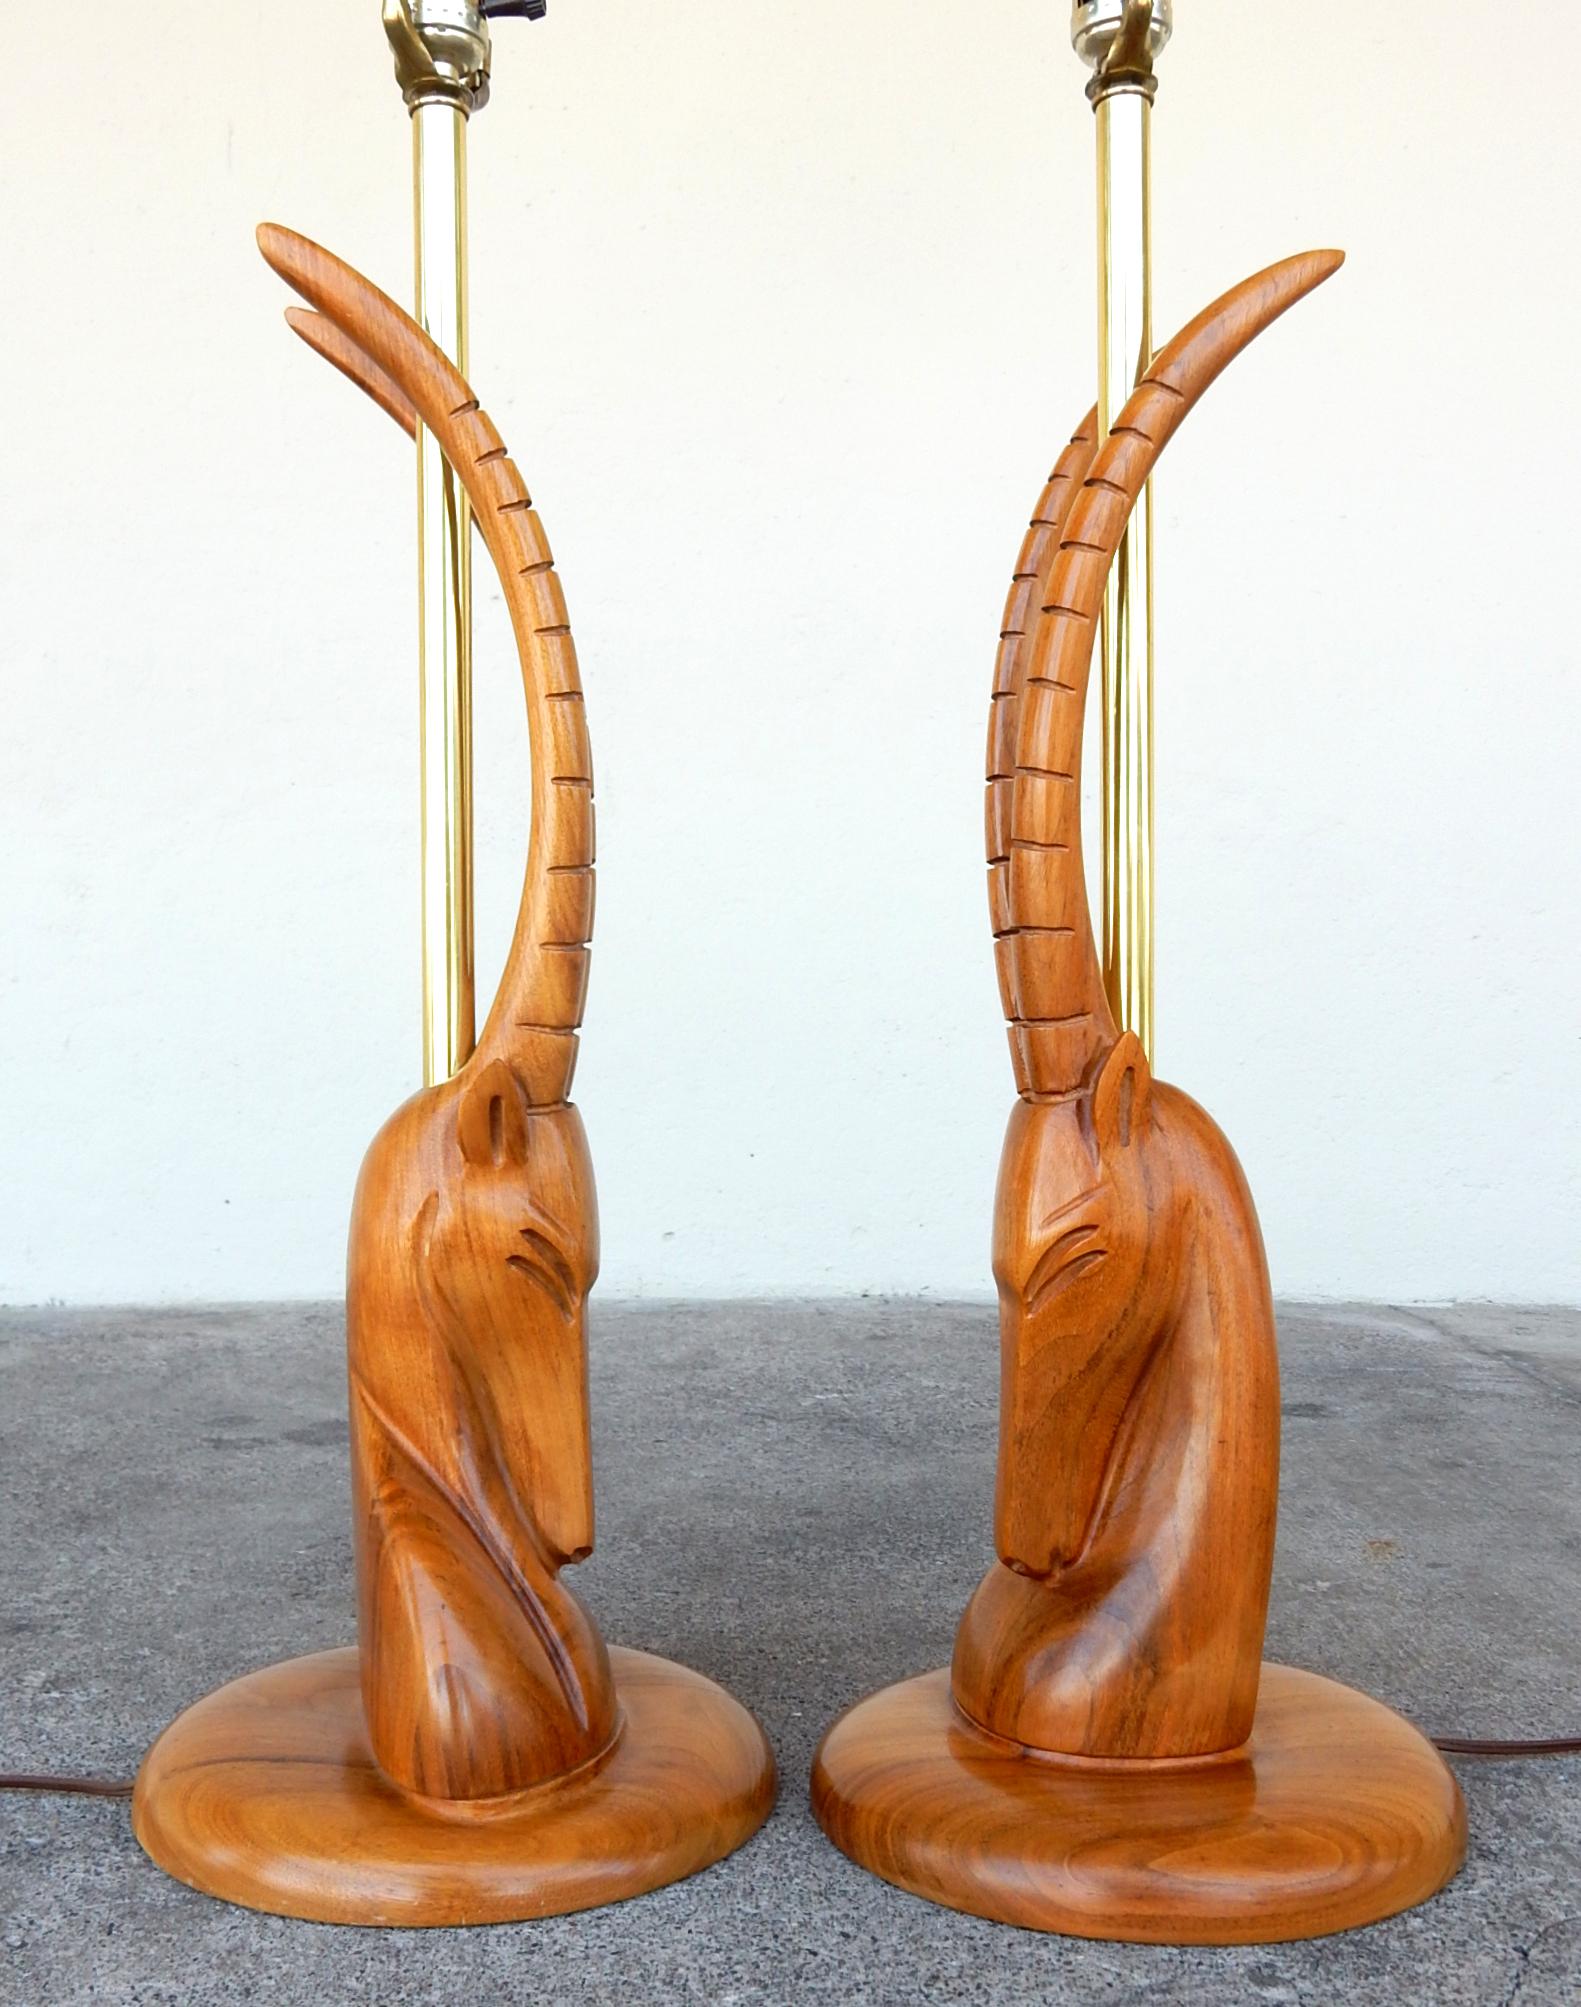 Magnificent moderne gazelle bust table lamps.
Skillfully sculpted in walnut.
Not signed or marked.
Both are in excellent condition with no damage, cracks or repairs.
These are large lamps. The gazelle are 22